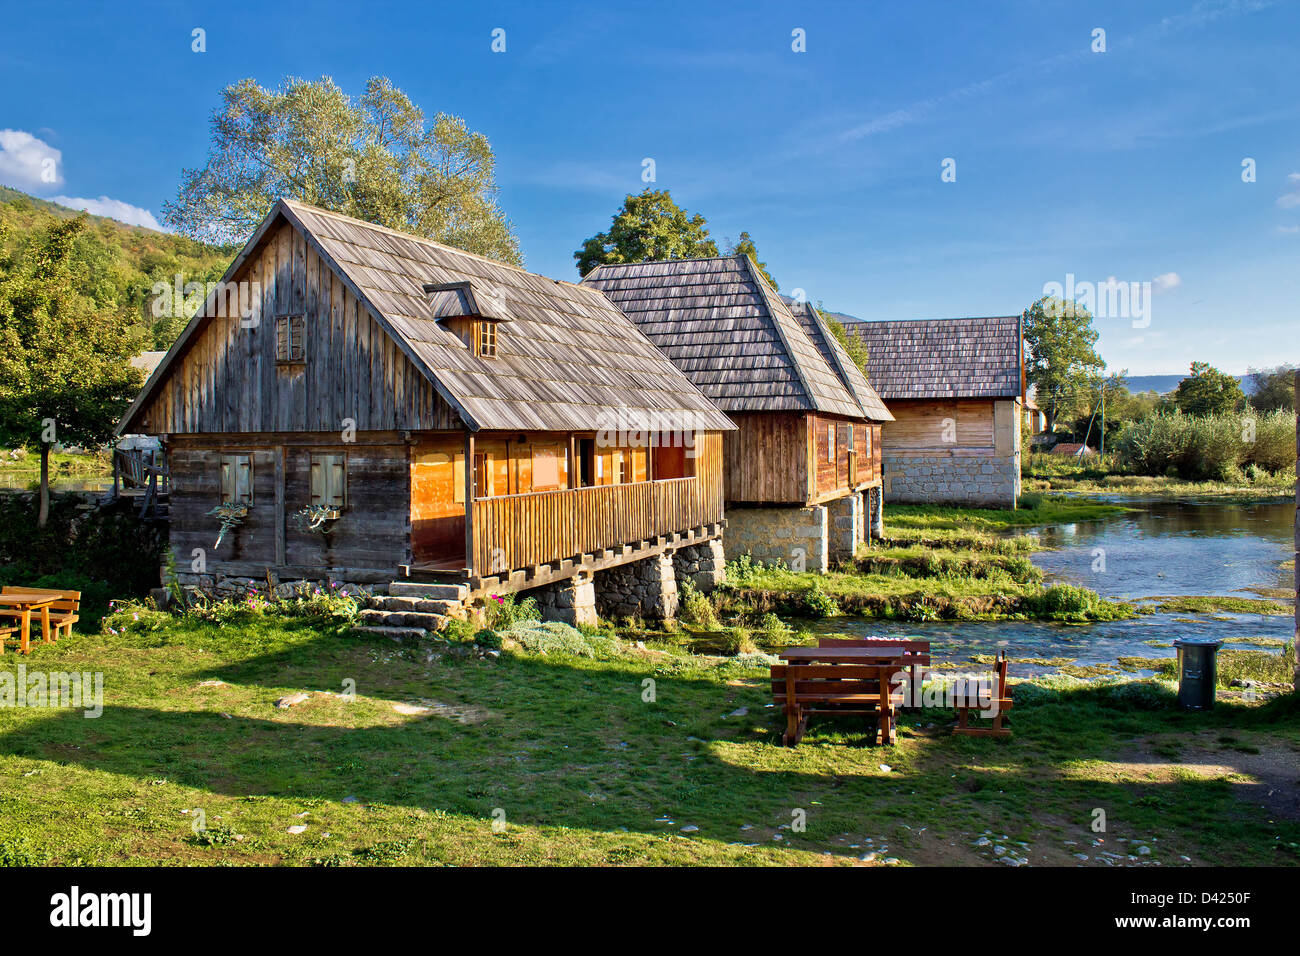 Old historic village with wooden cottages on Gacka river source, Majerovo vrilo, Lika, Croatia Stock Photo